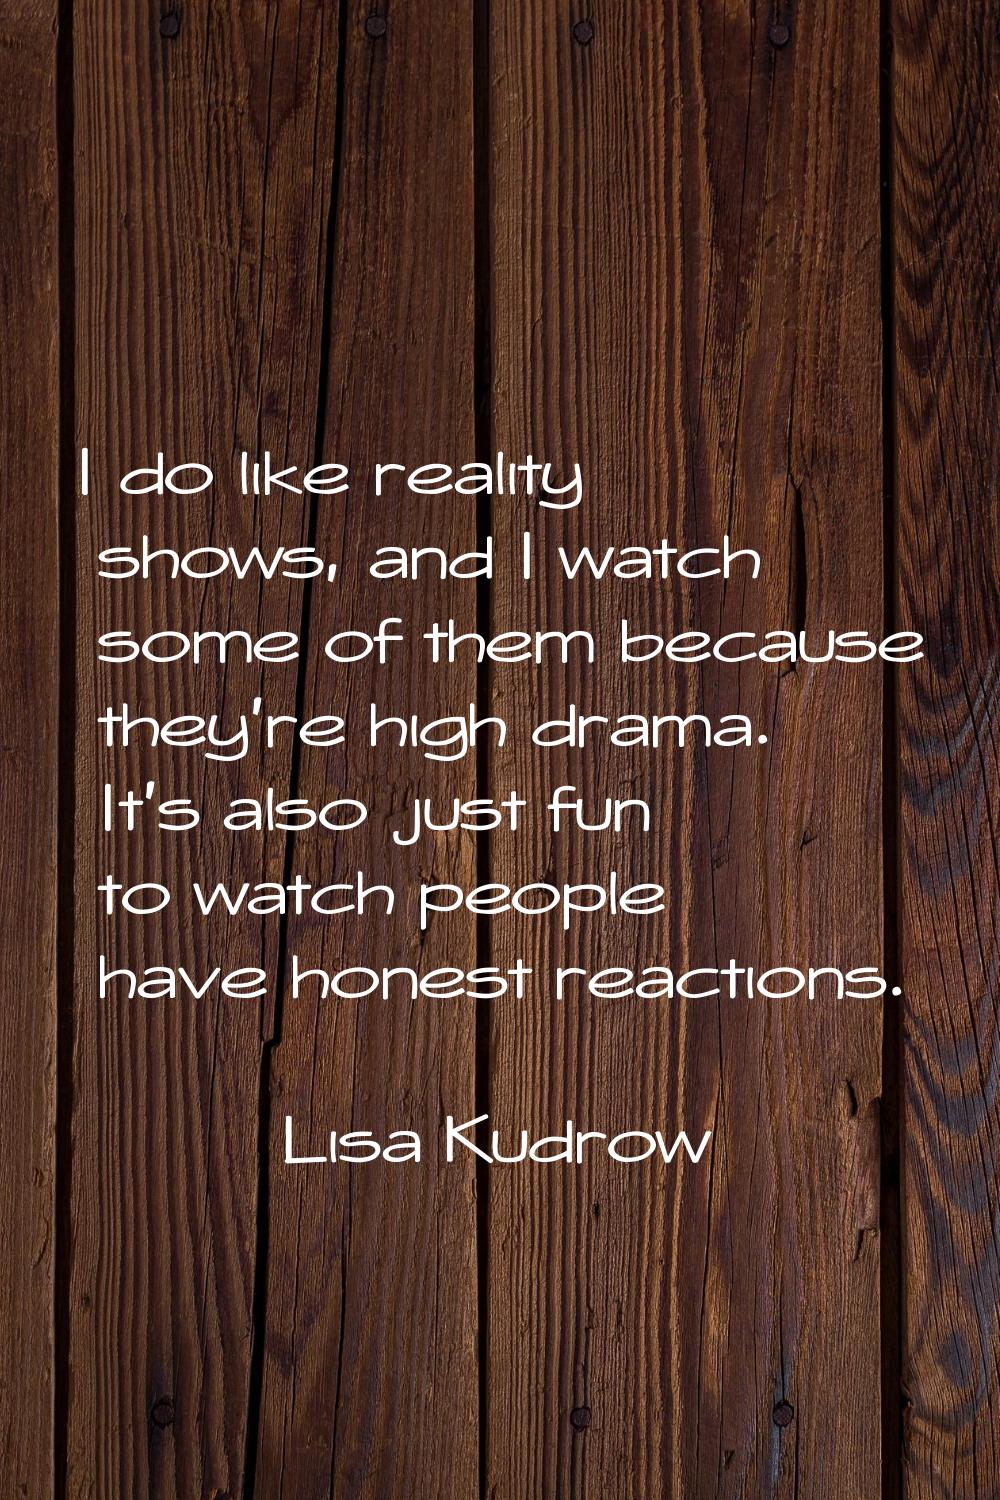 I do like reality shows, and I watch some of them because they're high drama. It's also just fun to